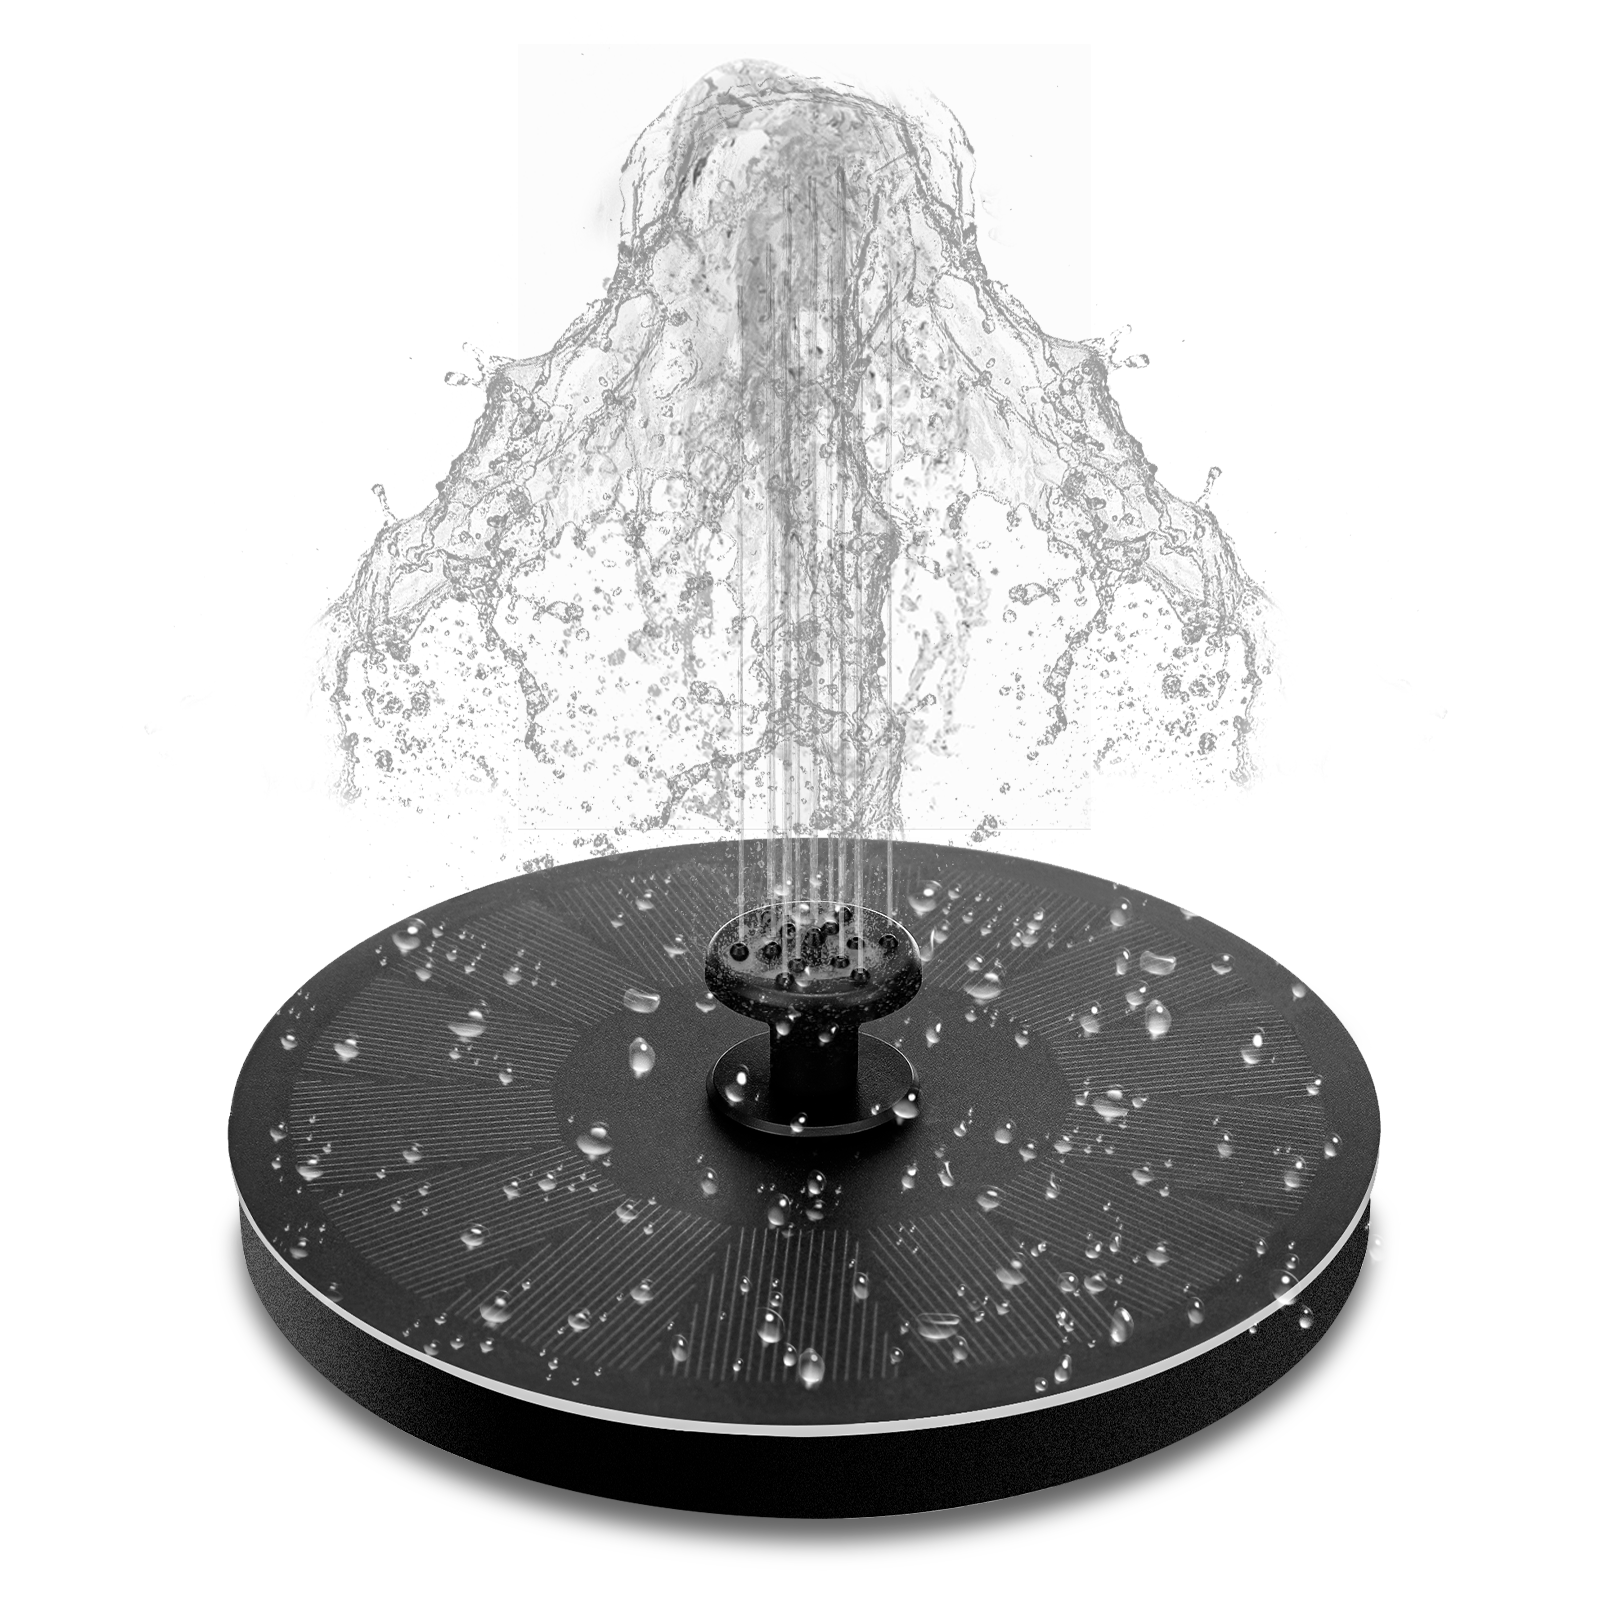 Find LIUMY Solar Fountain Pump 2 2W Floating Solar Round Water Pump Floating Panel With 7 Nozzles for Pond Fountain BirdBath Garden Decoration Water Cycling for Sale on Gipsybee.com with cryptocurrencies